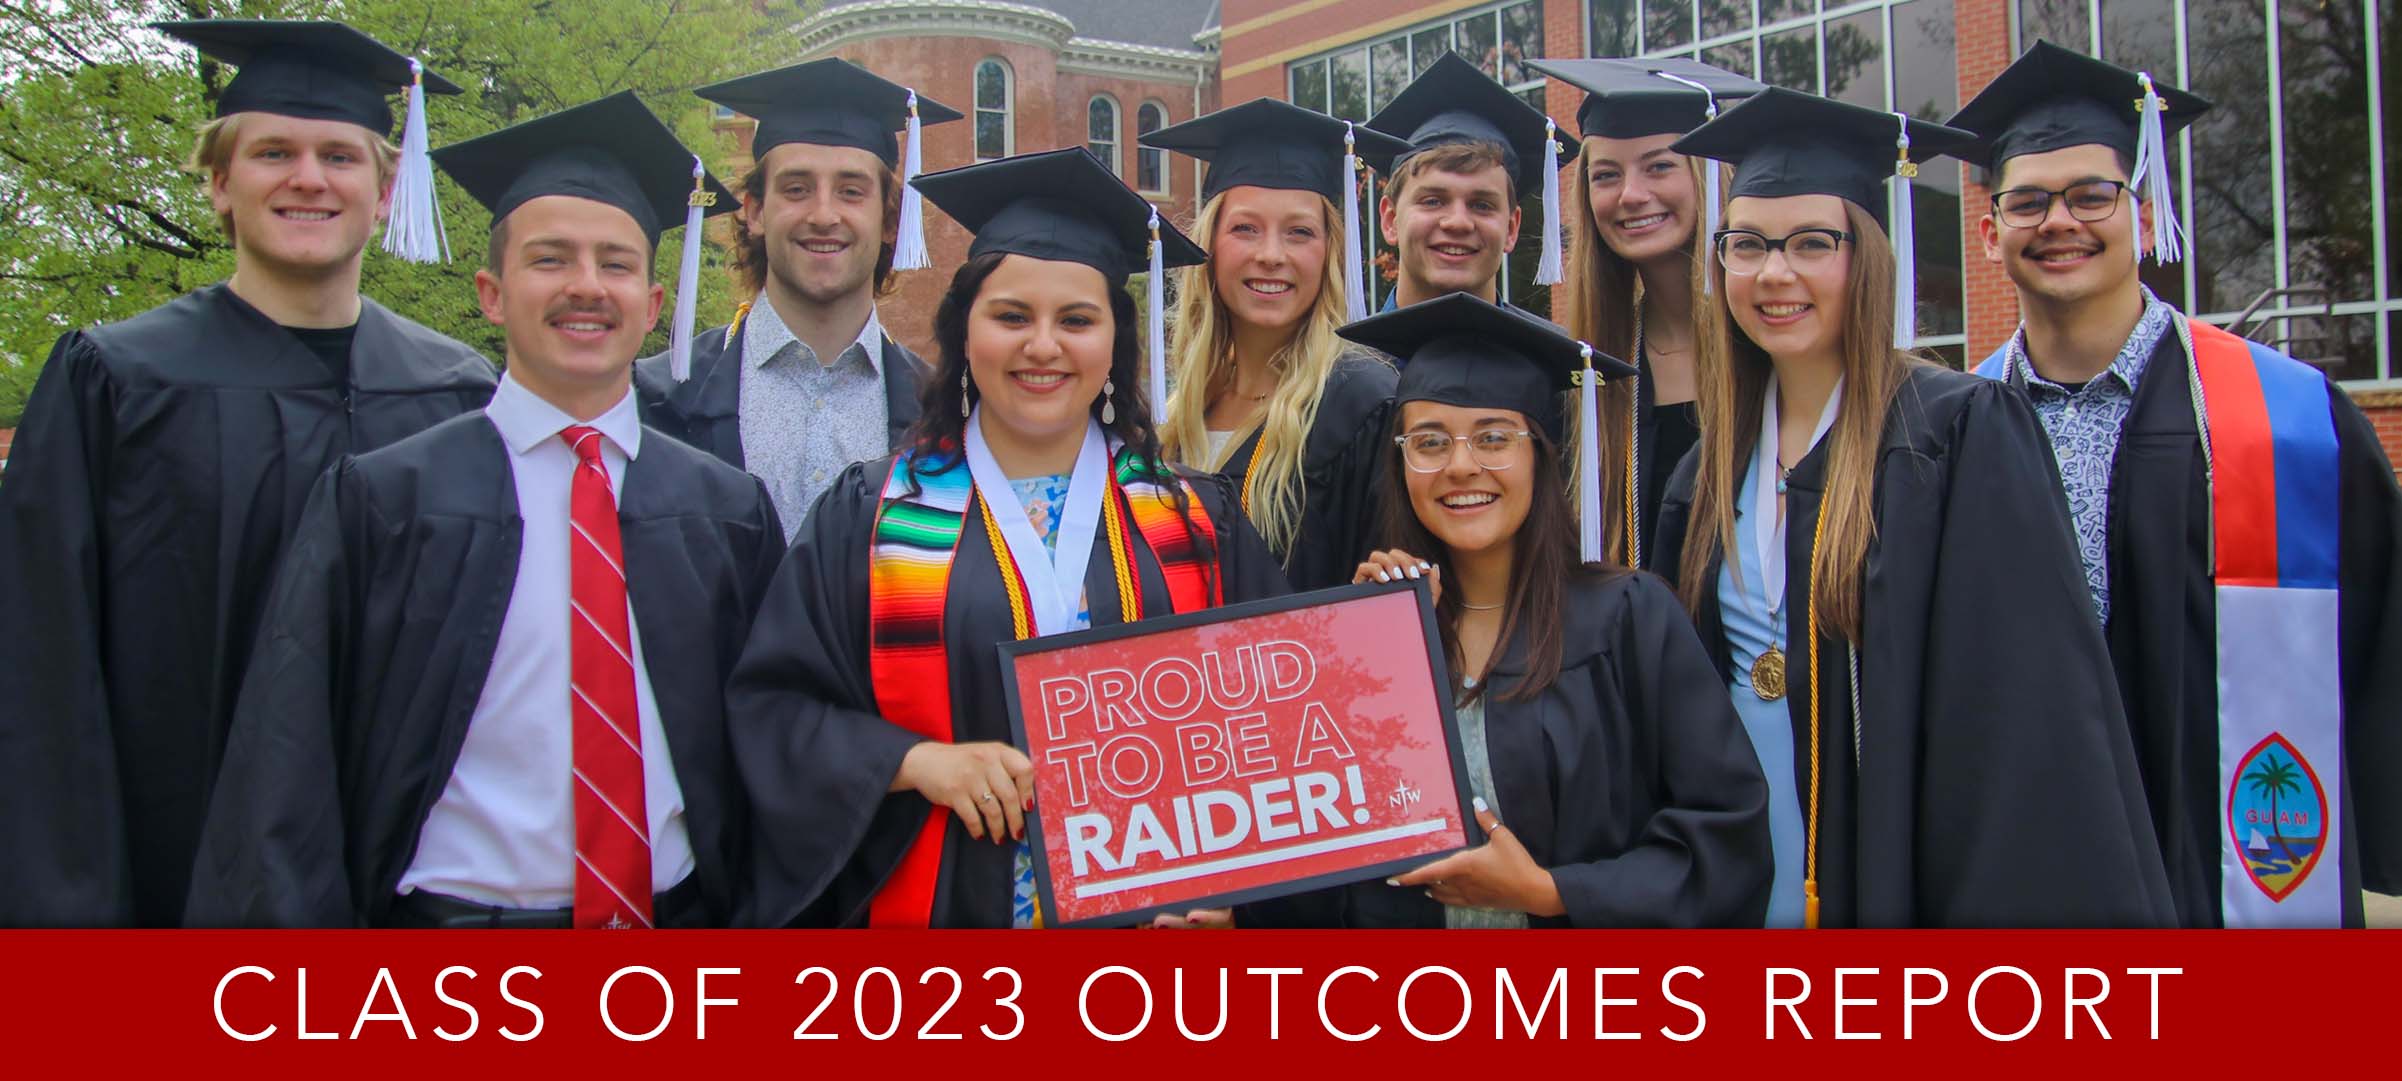 Class of 2023 Outcomes Report